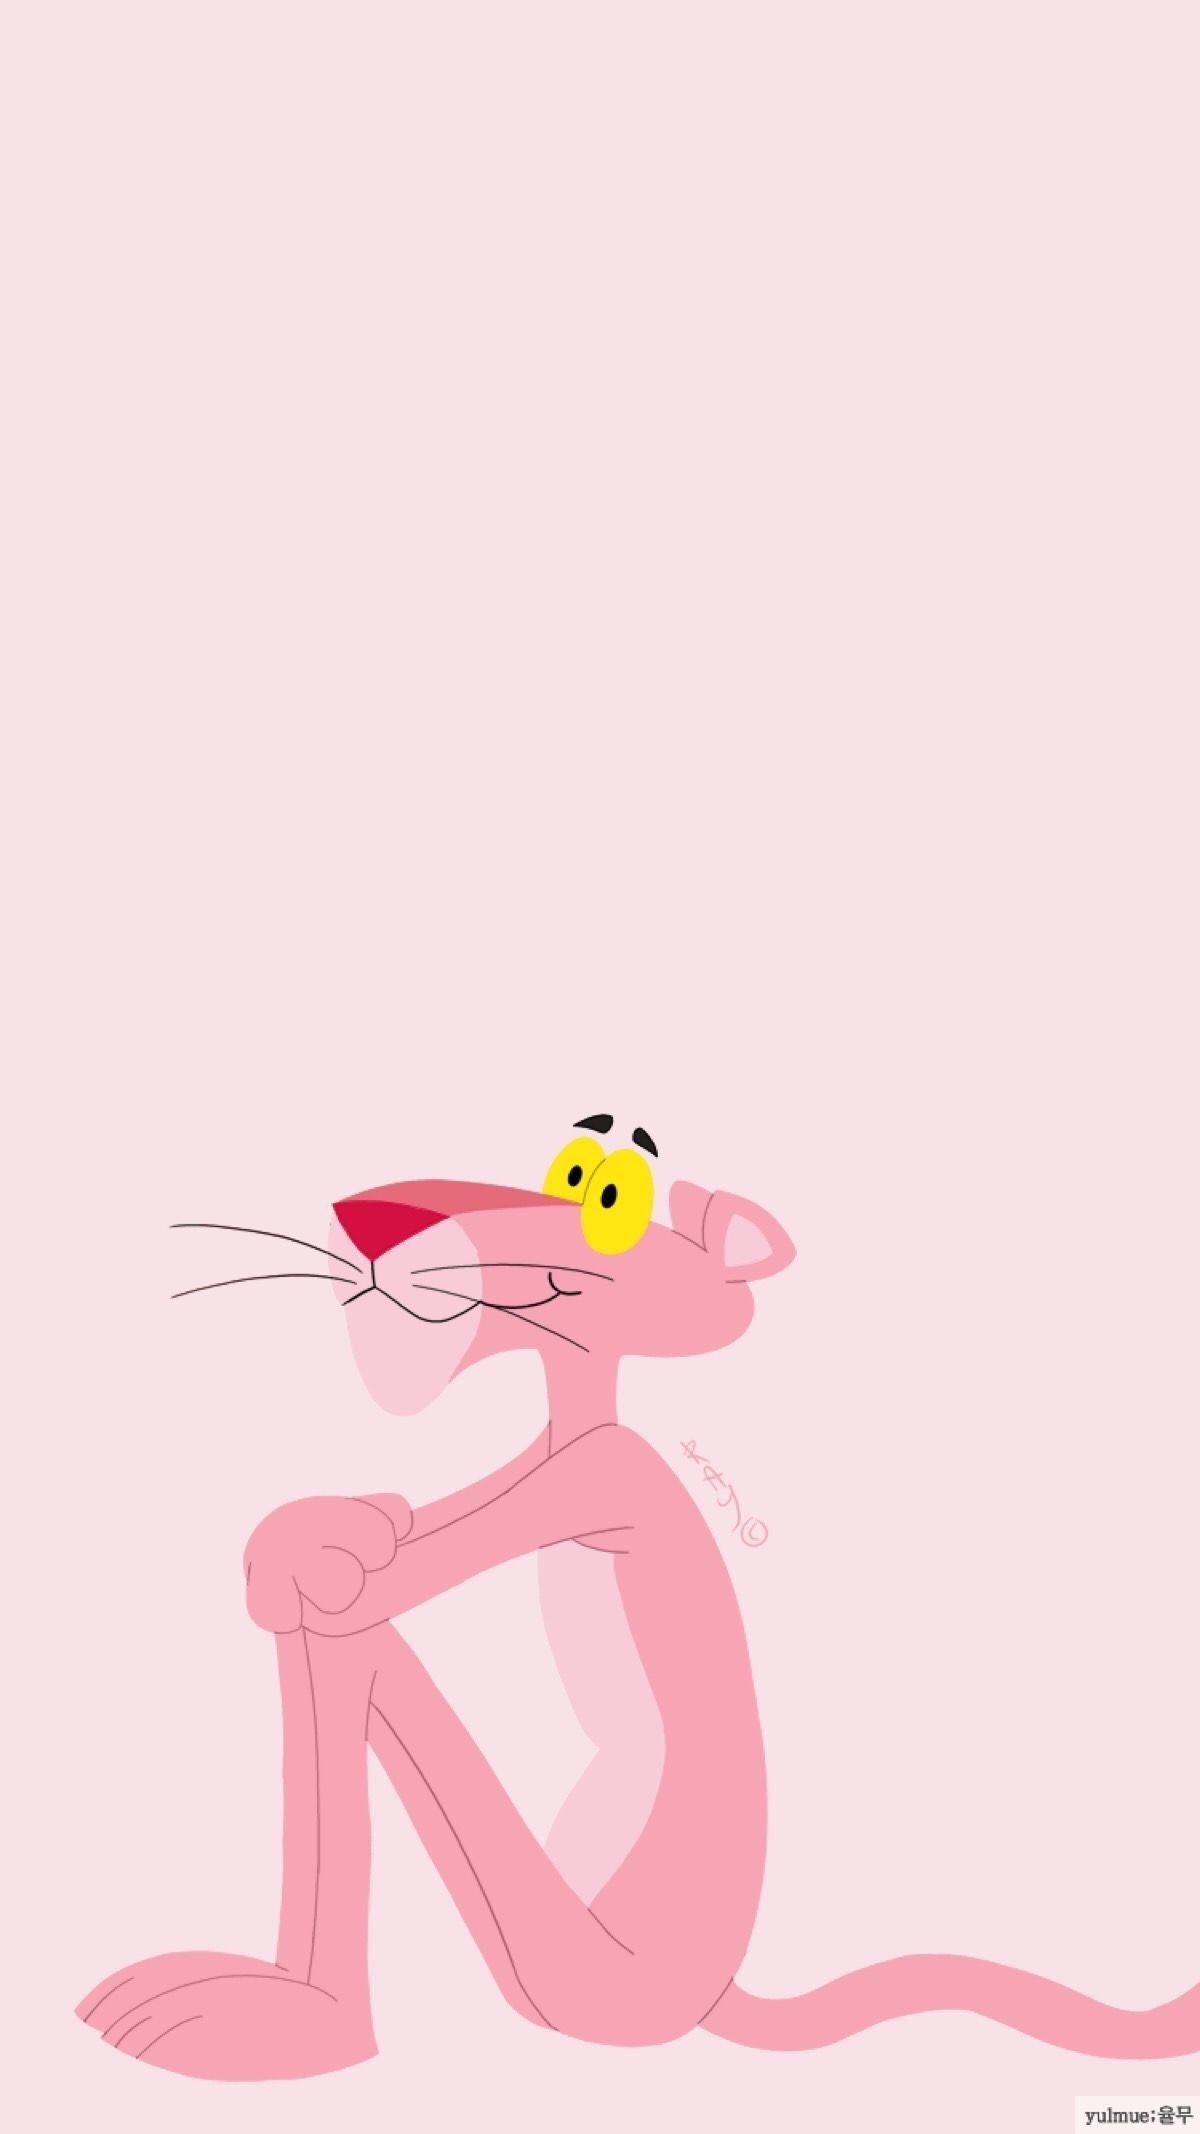 The pink panther sitting on a wall with his eyes closed - Pink Panther